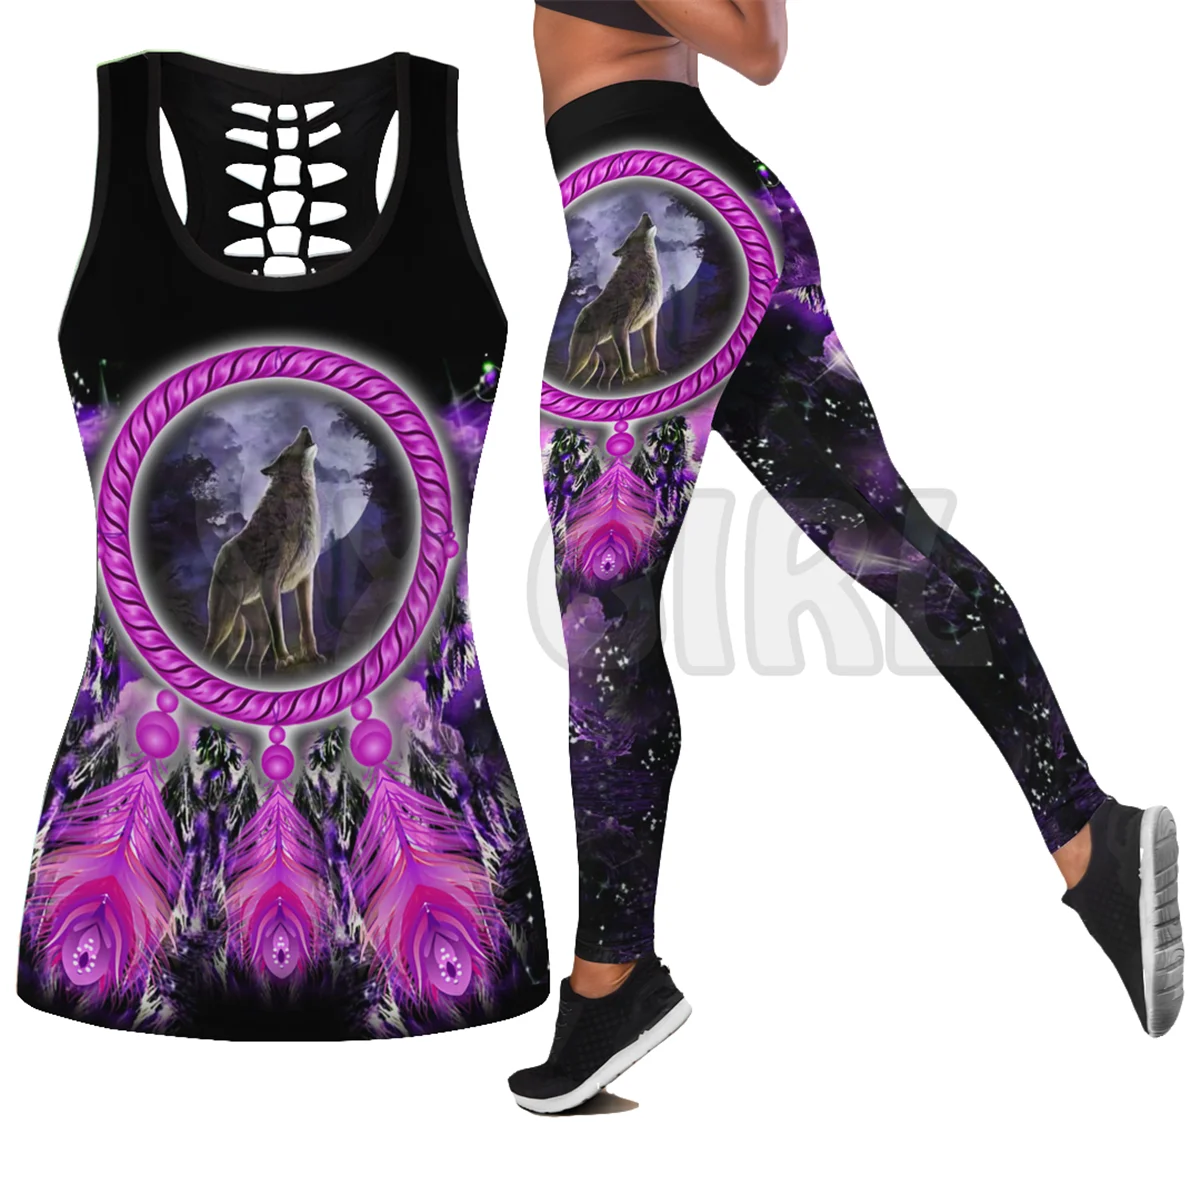 Native Wolf Violet  3D Printed Tank Top+Legging Combo Outfit Yoga Fitness Legging Women